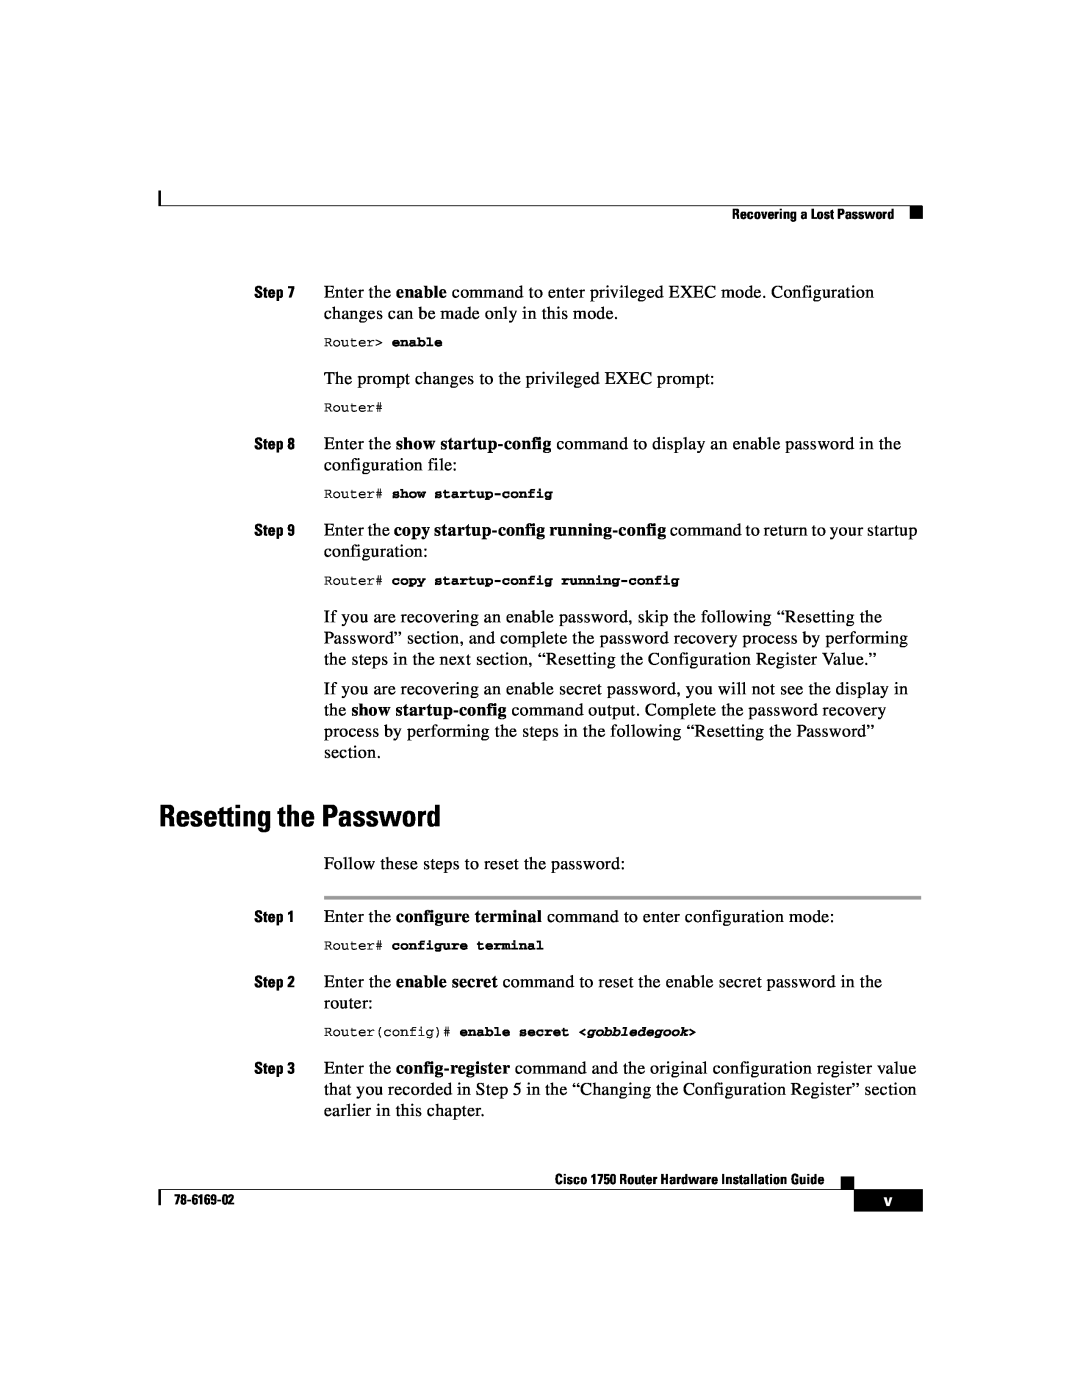 Cisco Systems CISCO1750 manual Resetting the Password 